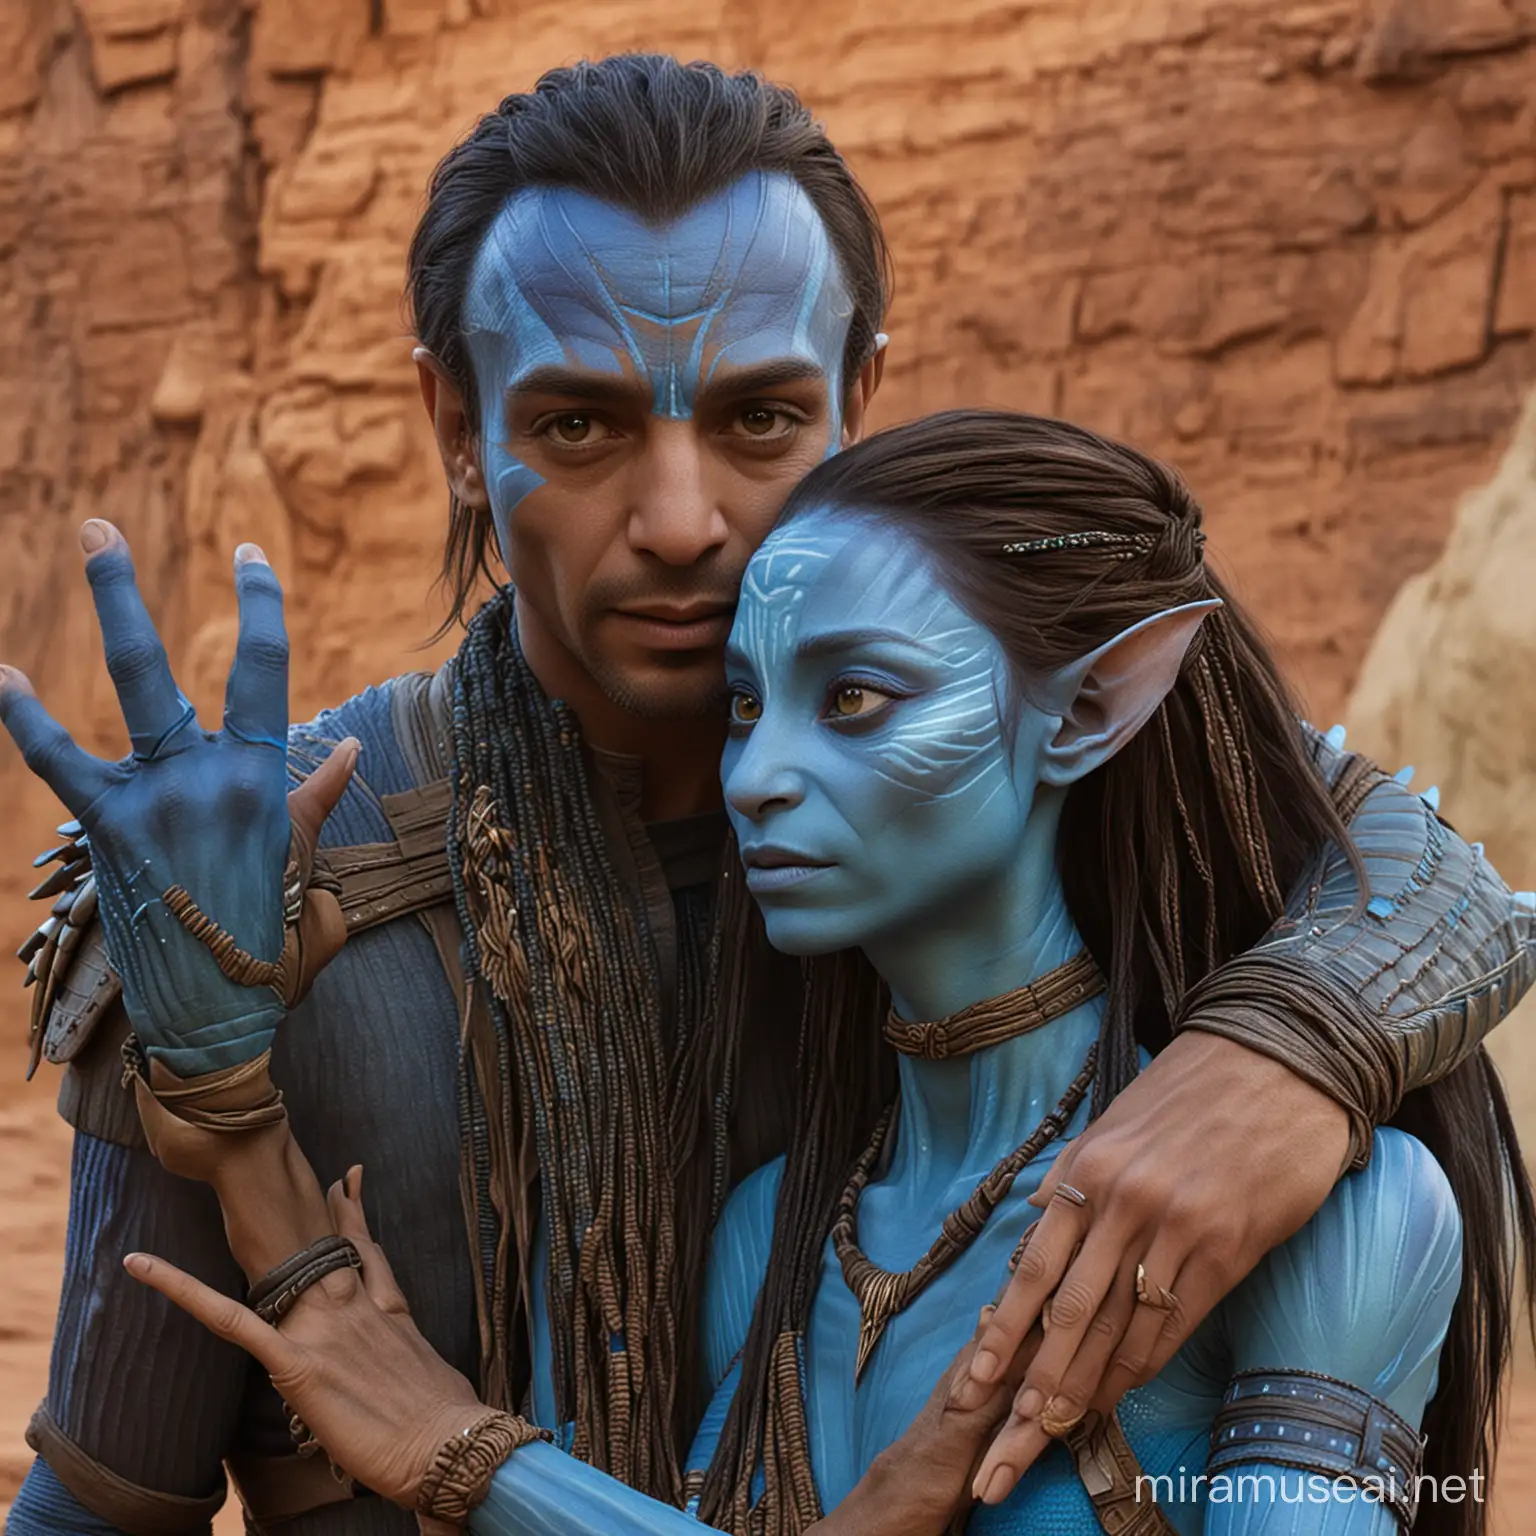 Yusuf Gney Touches Neytiris Shoulder in Intimate Moment